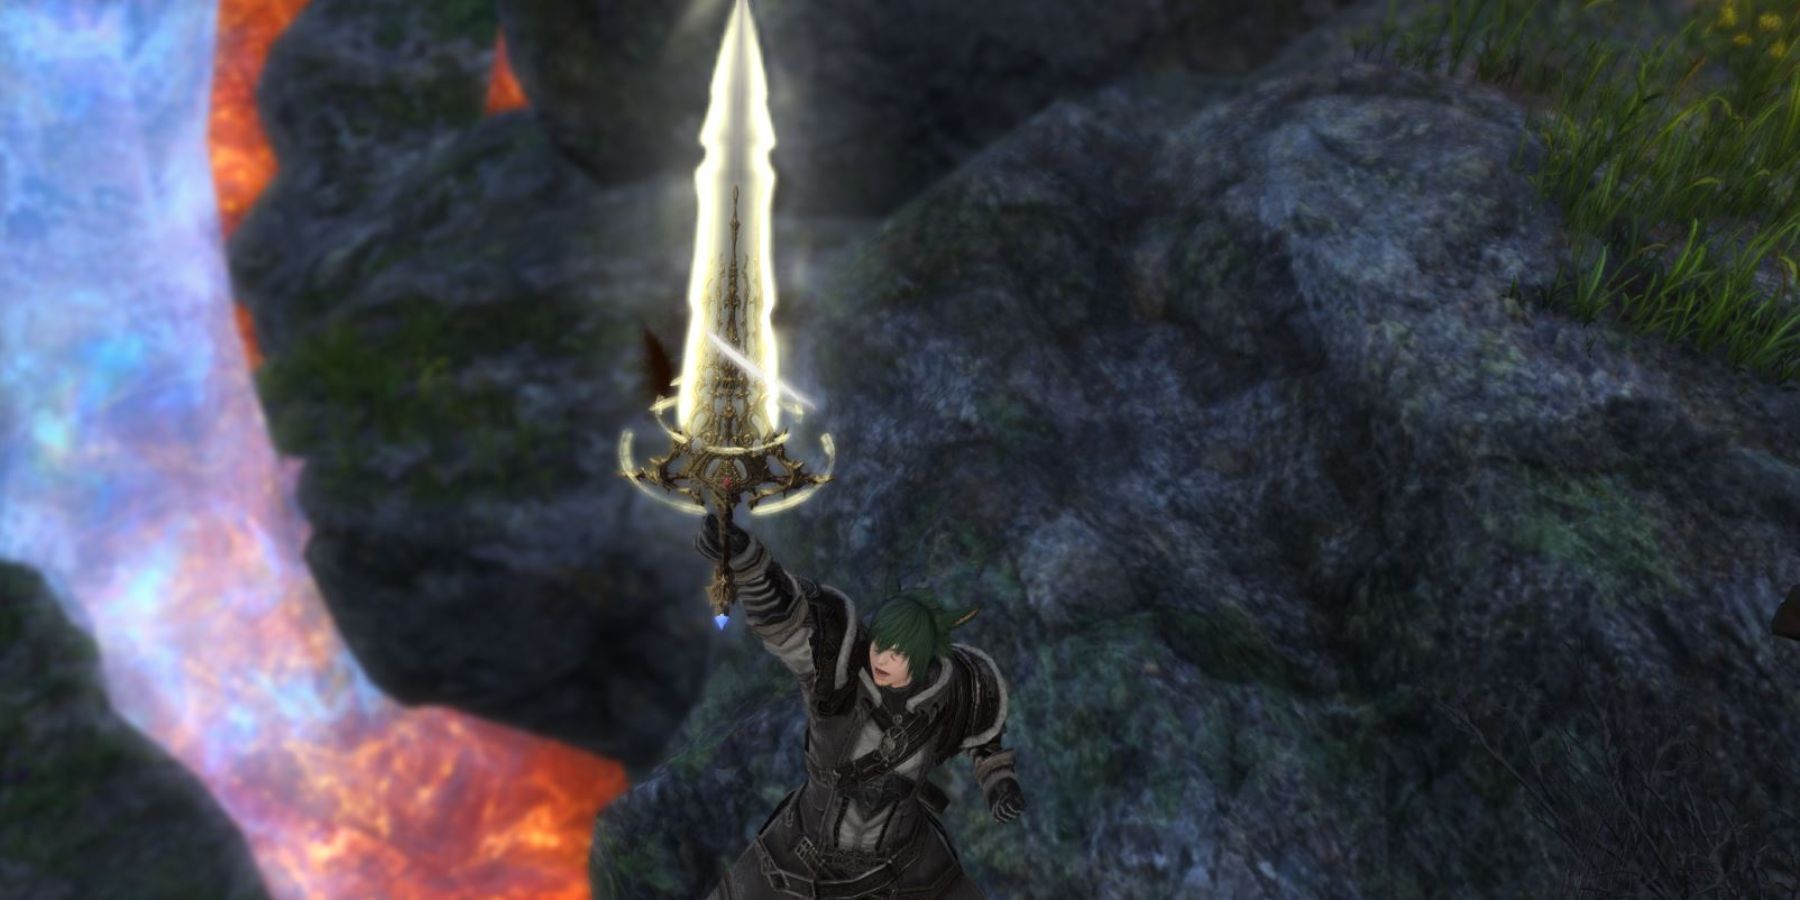 A player wielding Excalibur